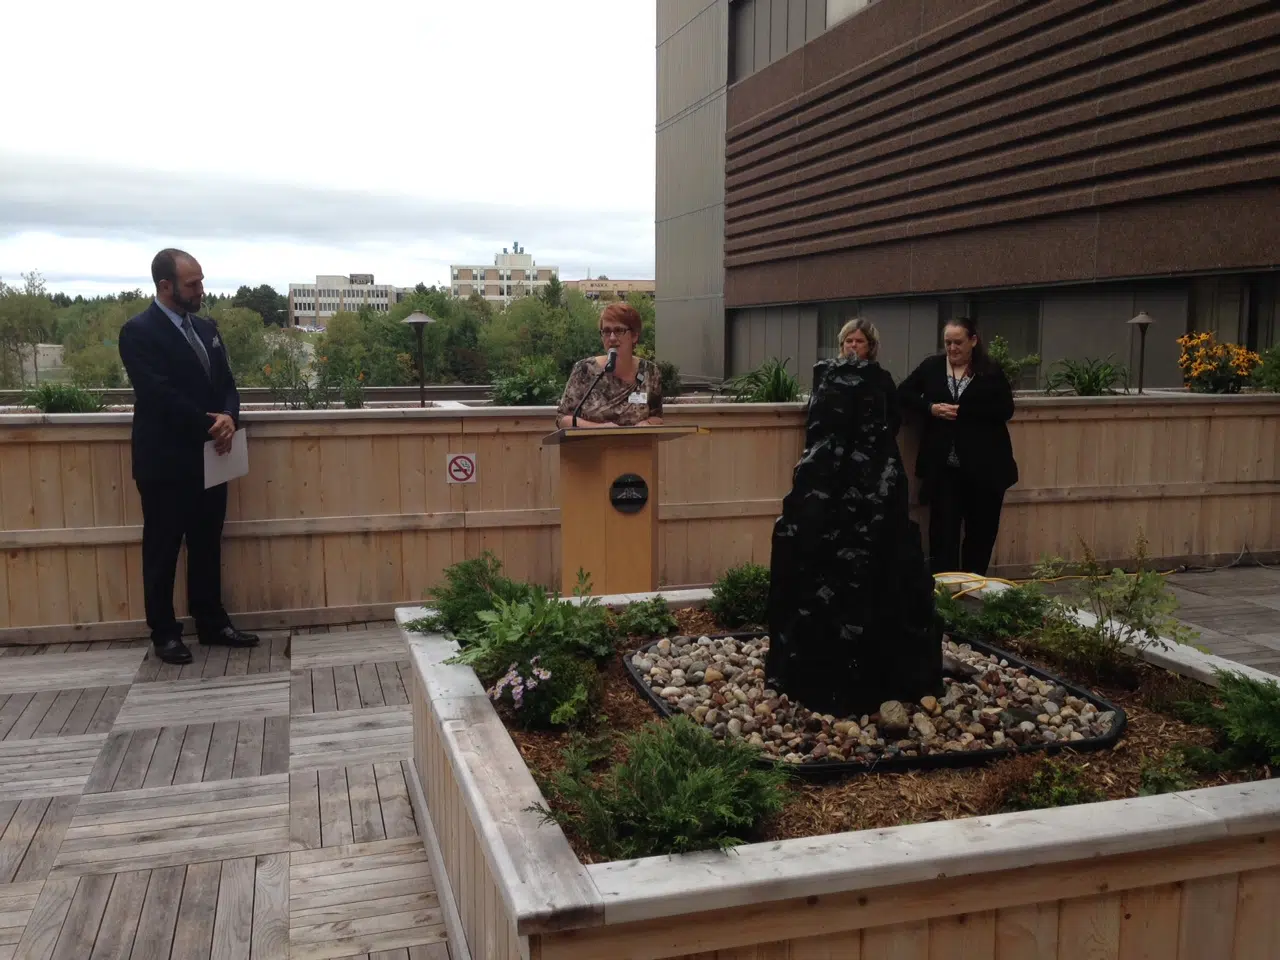 New Rooftop Garden Will Help Patients and Families